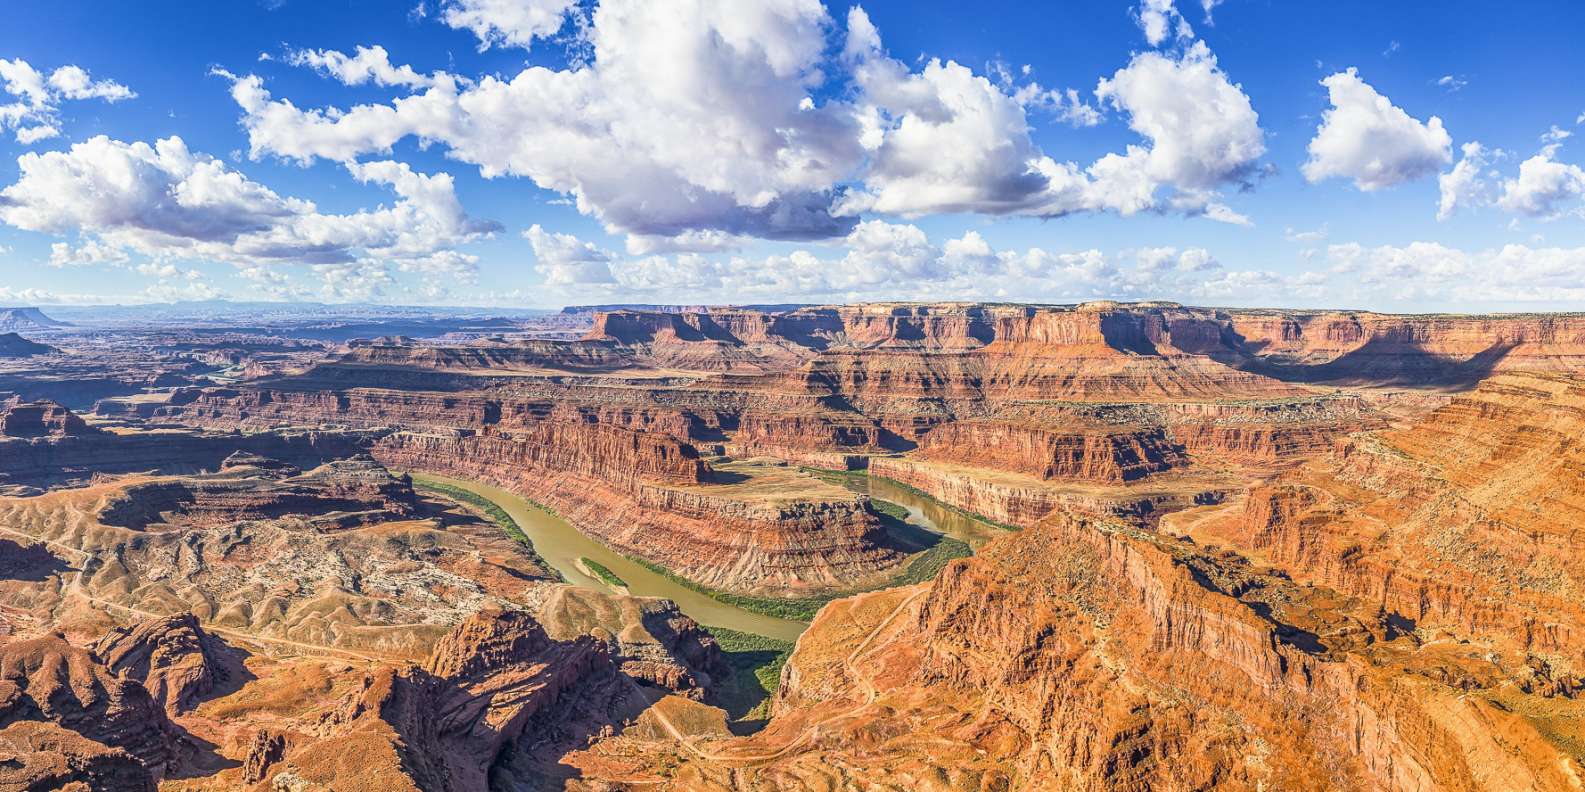 Grand Canyon Early Tour Luxury Tour Bus To The South Rim, 40% OFF